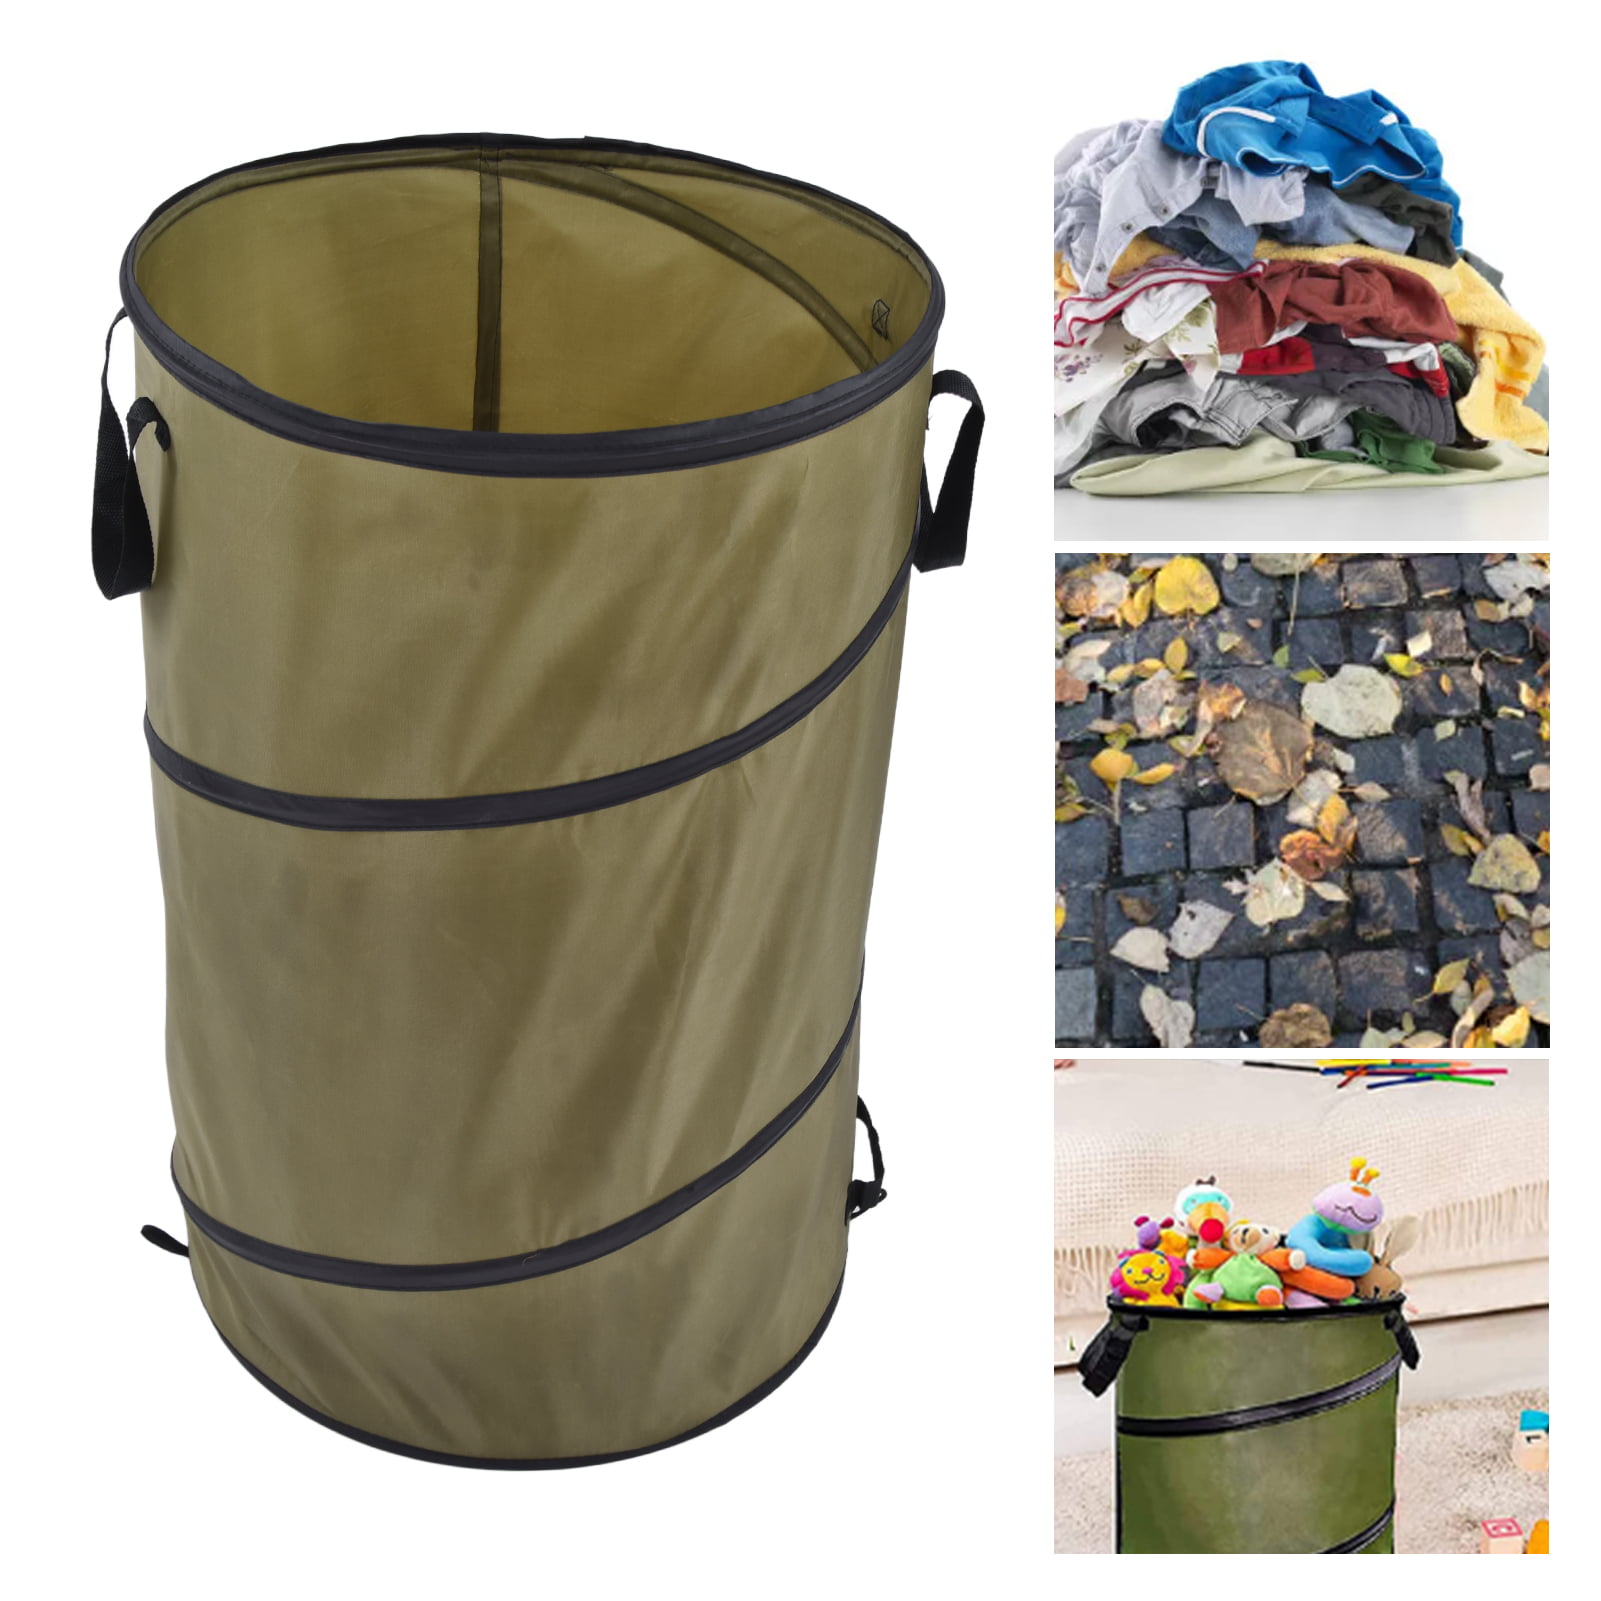 RXMORI 113L Collapsible Trash Can, 30 Gallon Recycling Large Leaf